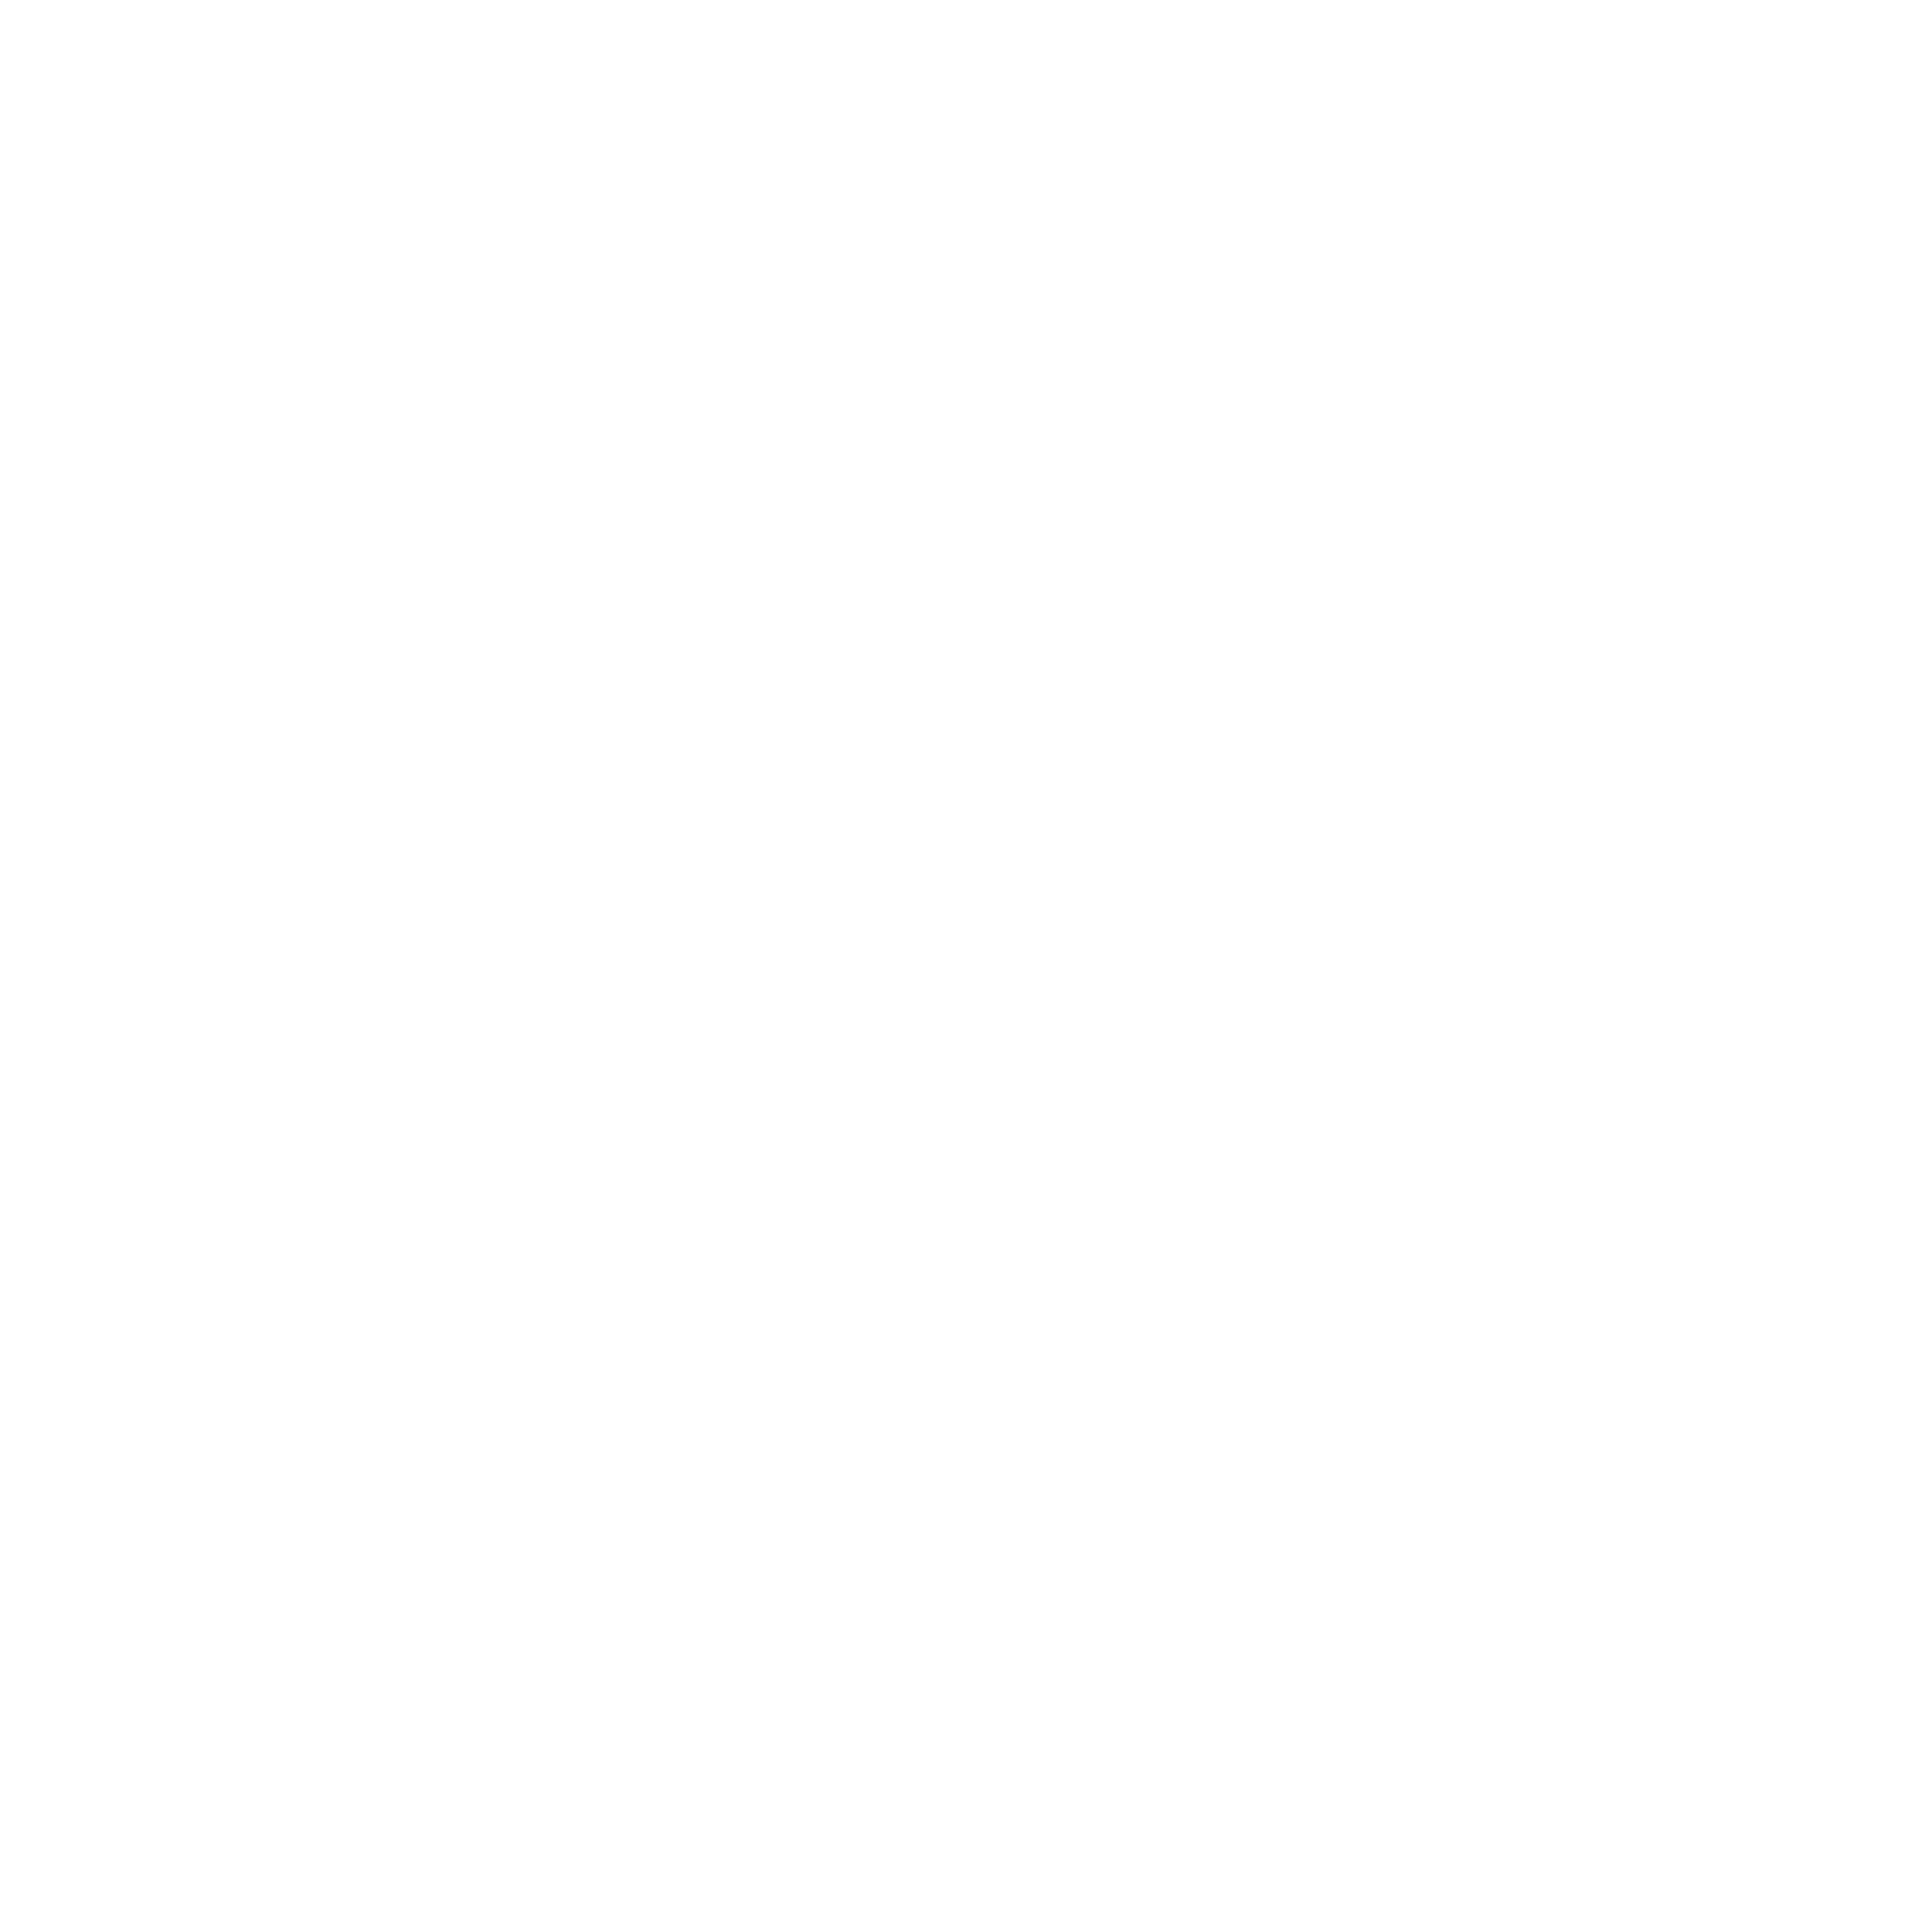 CTS LOGO 2 WHITE.png